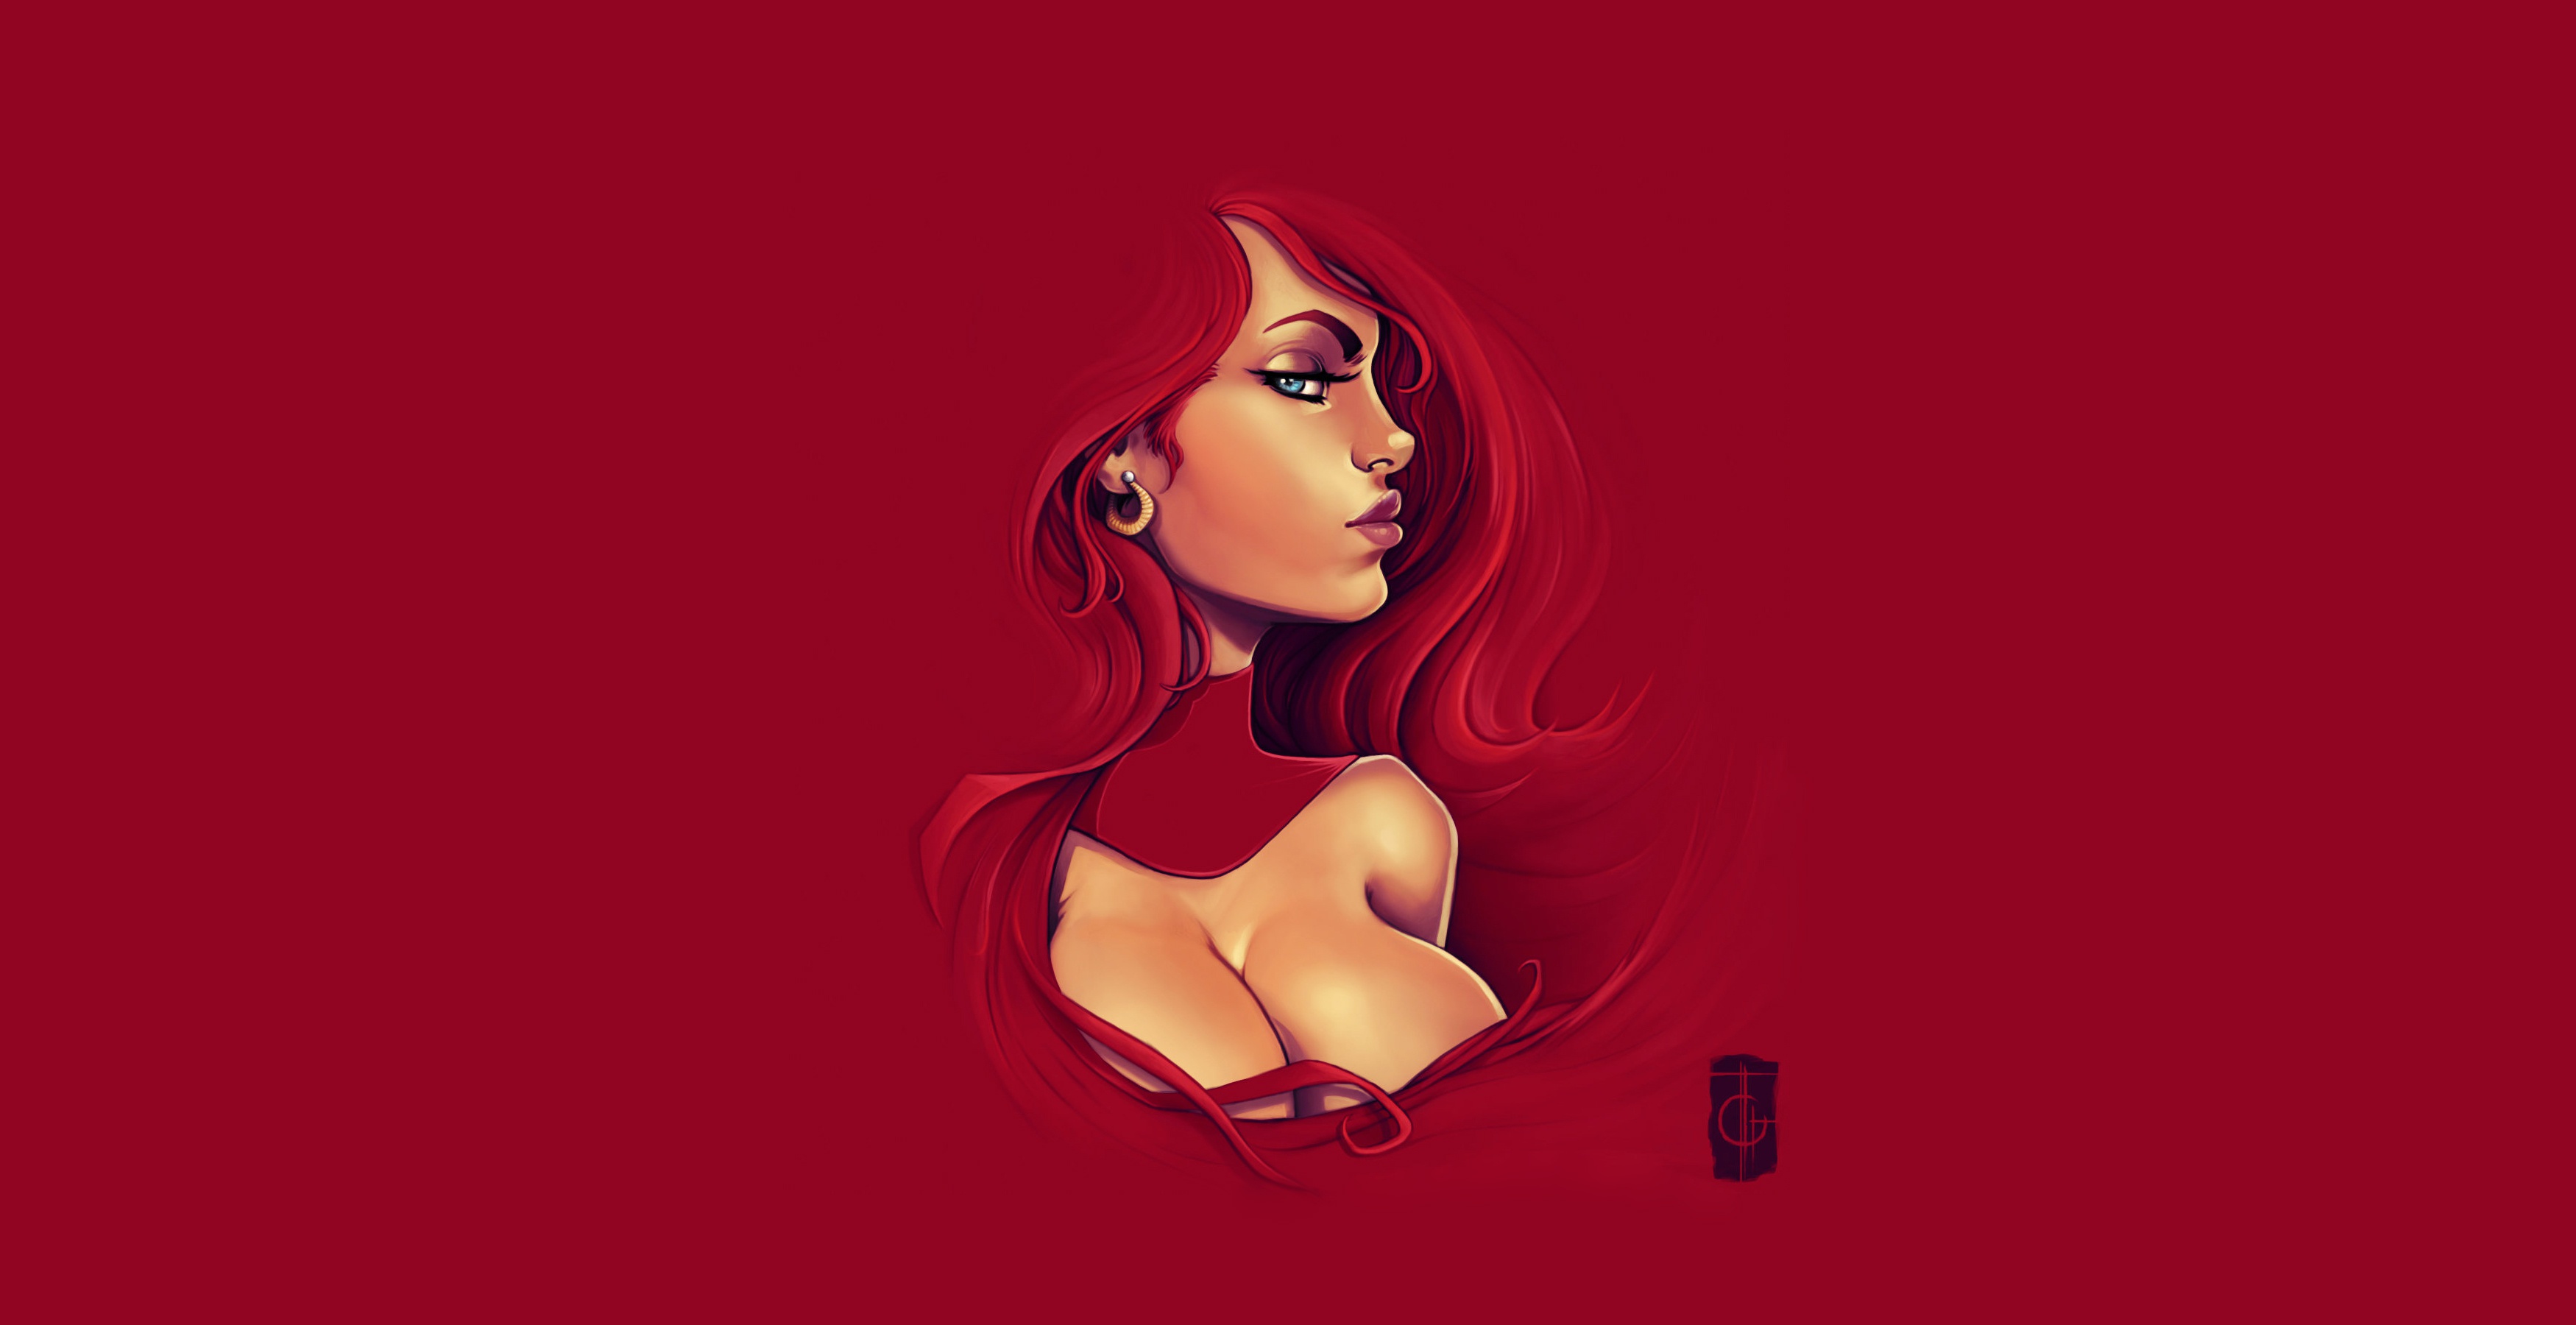 General 3500x1800 women artwork big boobs redhead face profile simple background red background